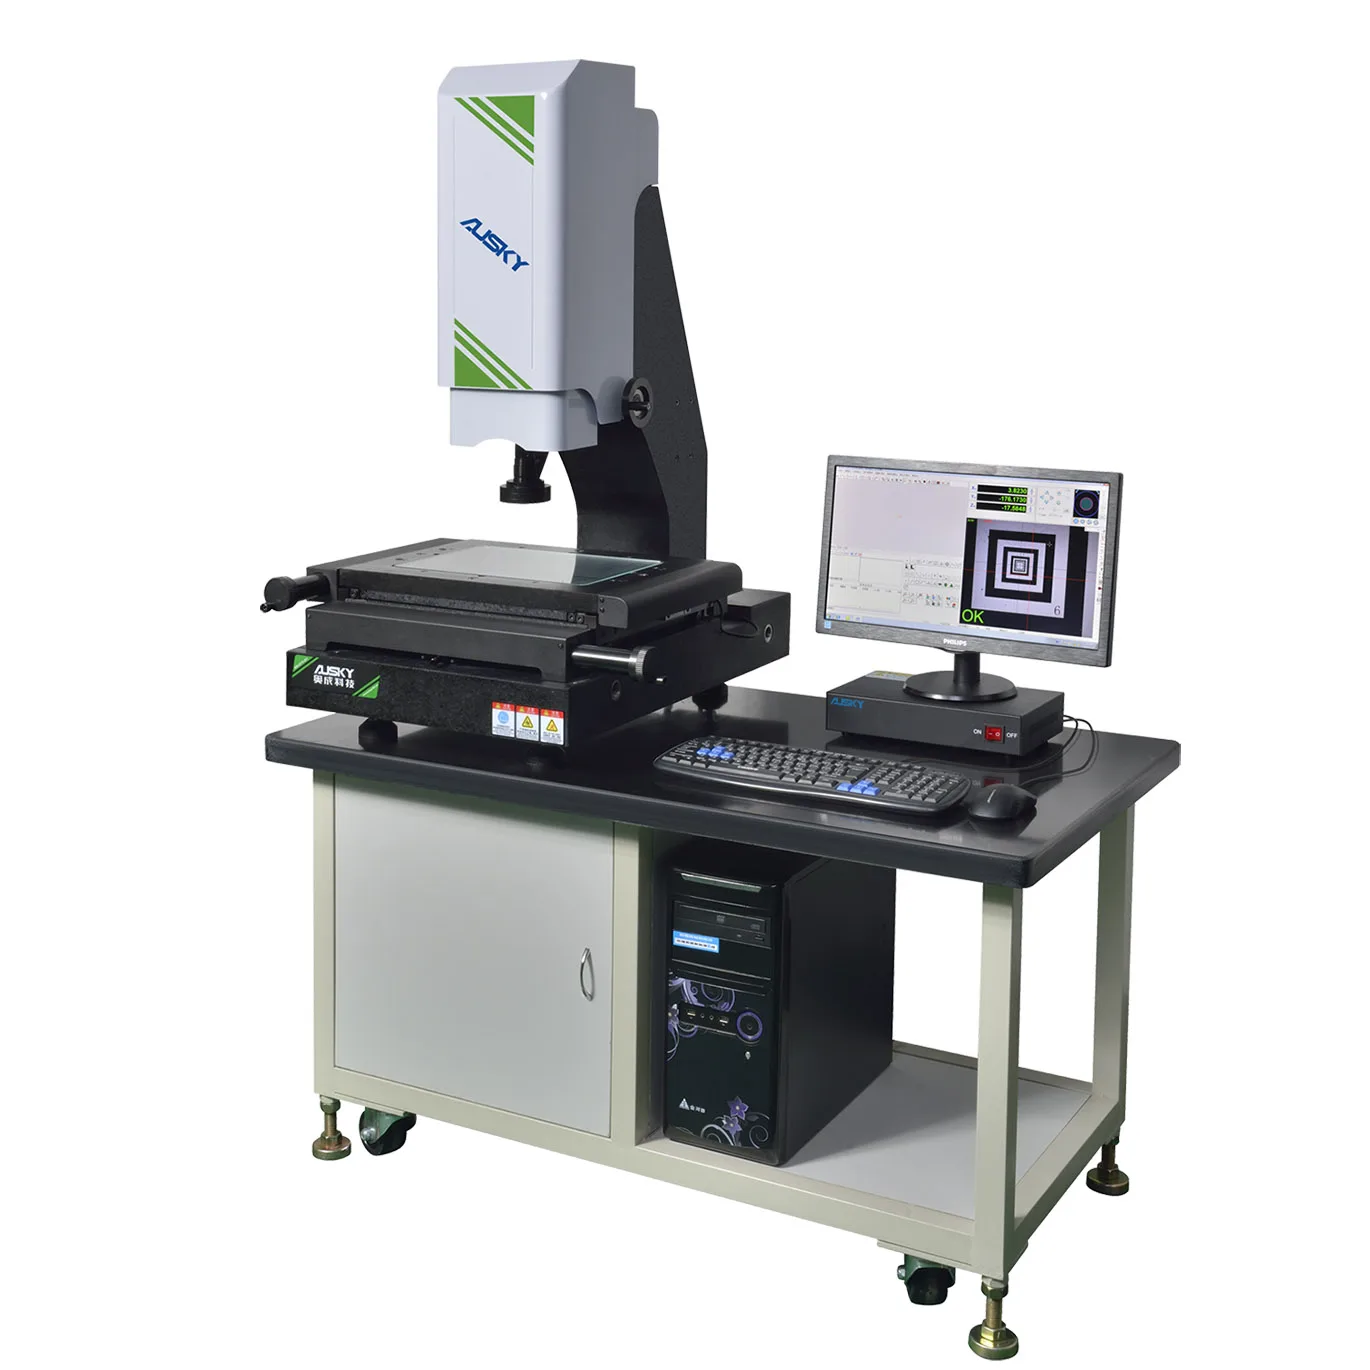 

High Accuracy Optical Image Measuring Instrument For Coordinate Measurement